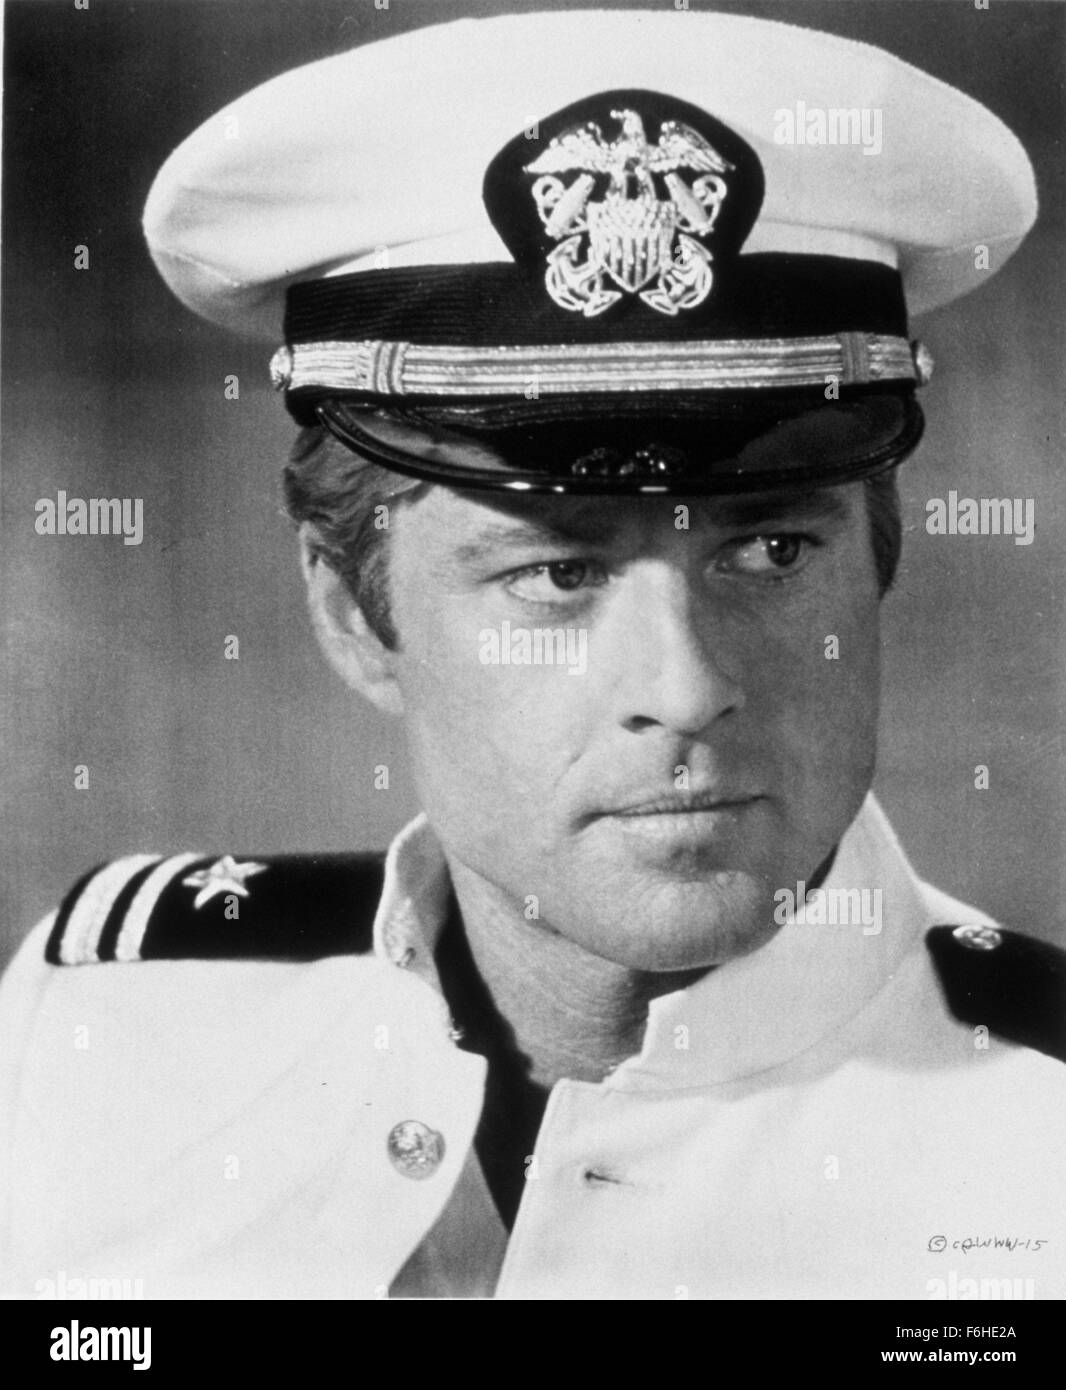 1973, Film Title: WAY WE WERE, Director: SYDNEY POLLACK, Studio: COLUMBIA, Pictured: 1973, CLOTHING, COLOR, NAVY UNIFORM, SYDNEY POLLACK, ROBERT REDFORD. (Credit Image: SNAP) Stock Photo